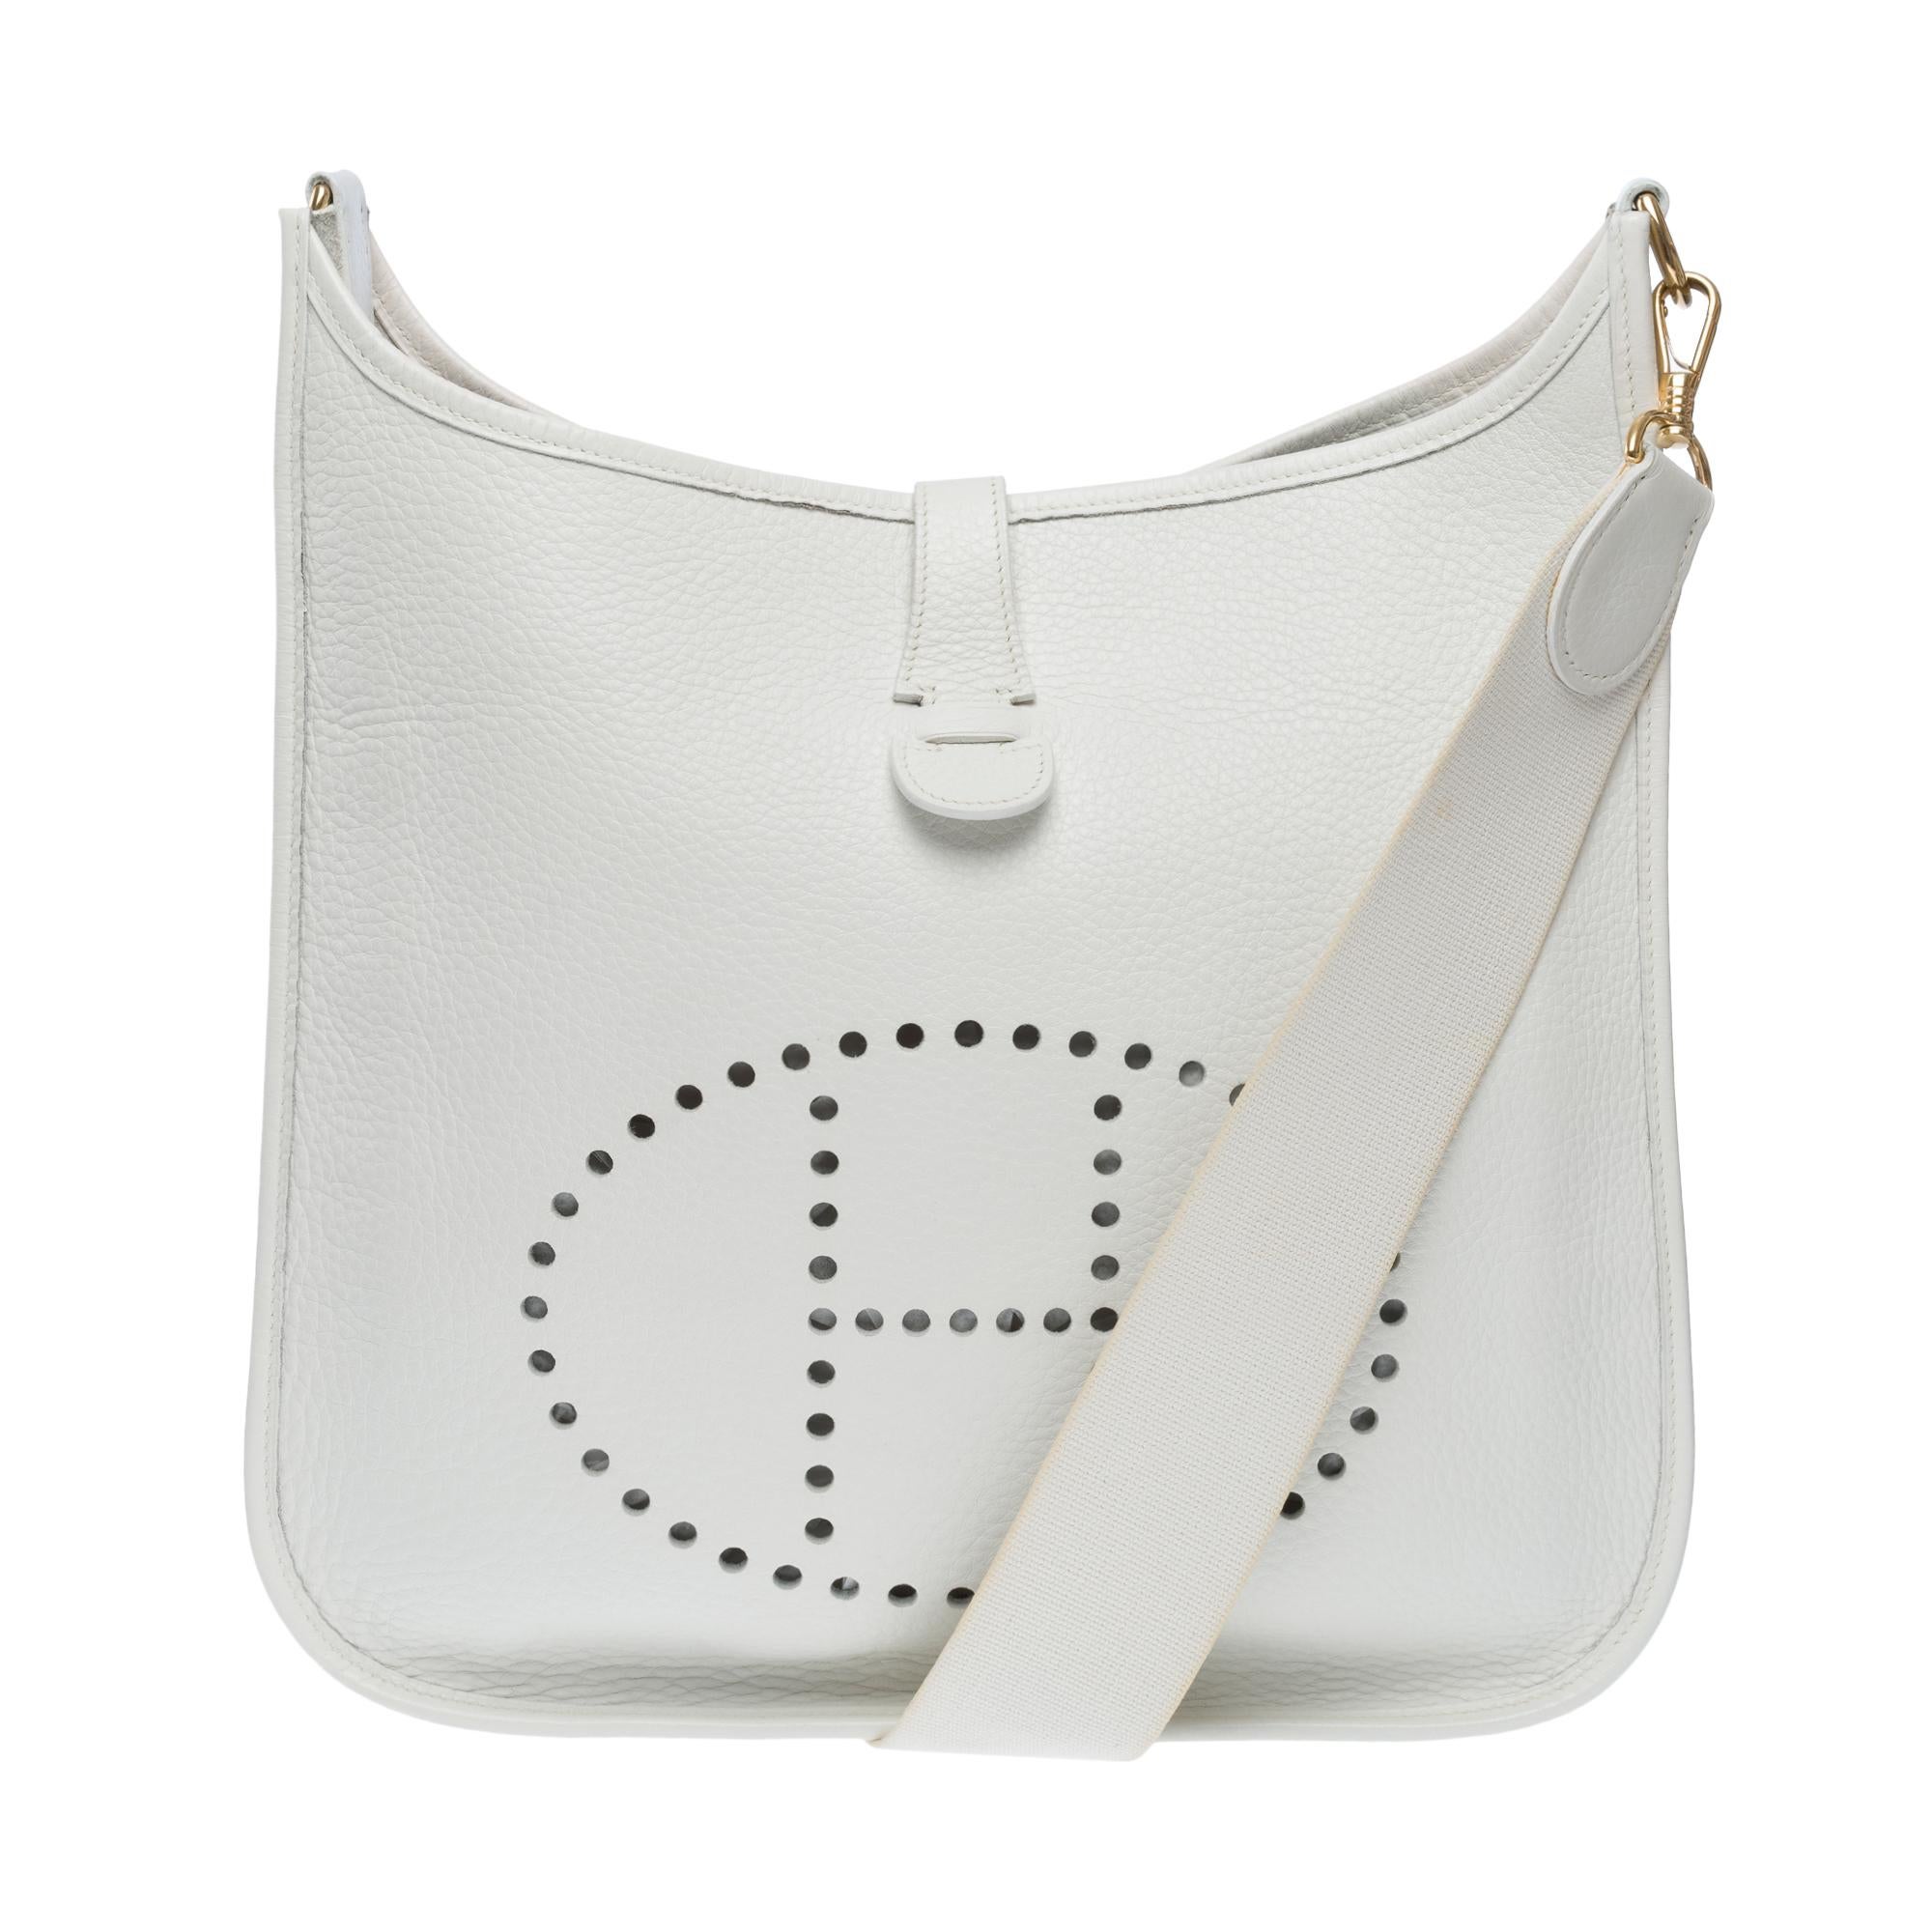 Iconic Hermes Evelyne GM shoulder bag in white Taurillon Clémence leather, gold metal trim, a removable shoulder strap in white canvas for shoulder or crossbody carry

Snap button closure on flap
Interior in white suede
Signature: 